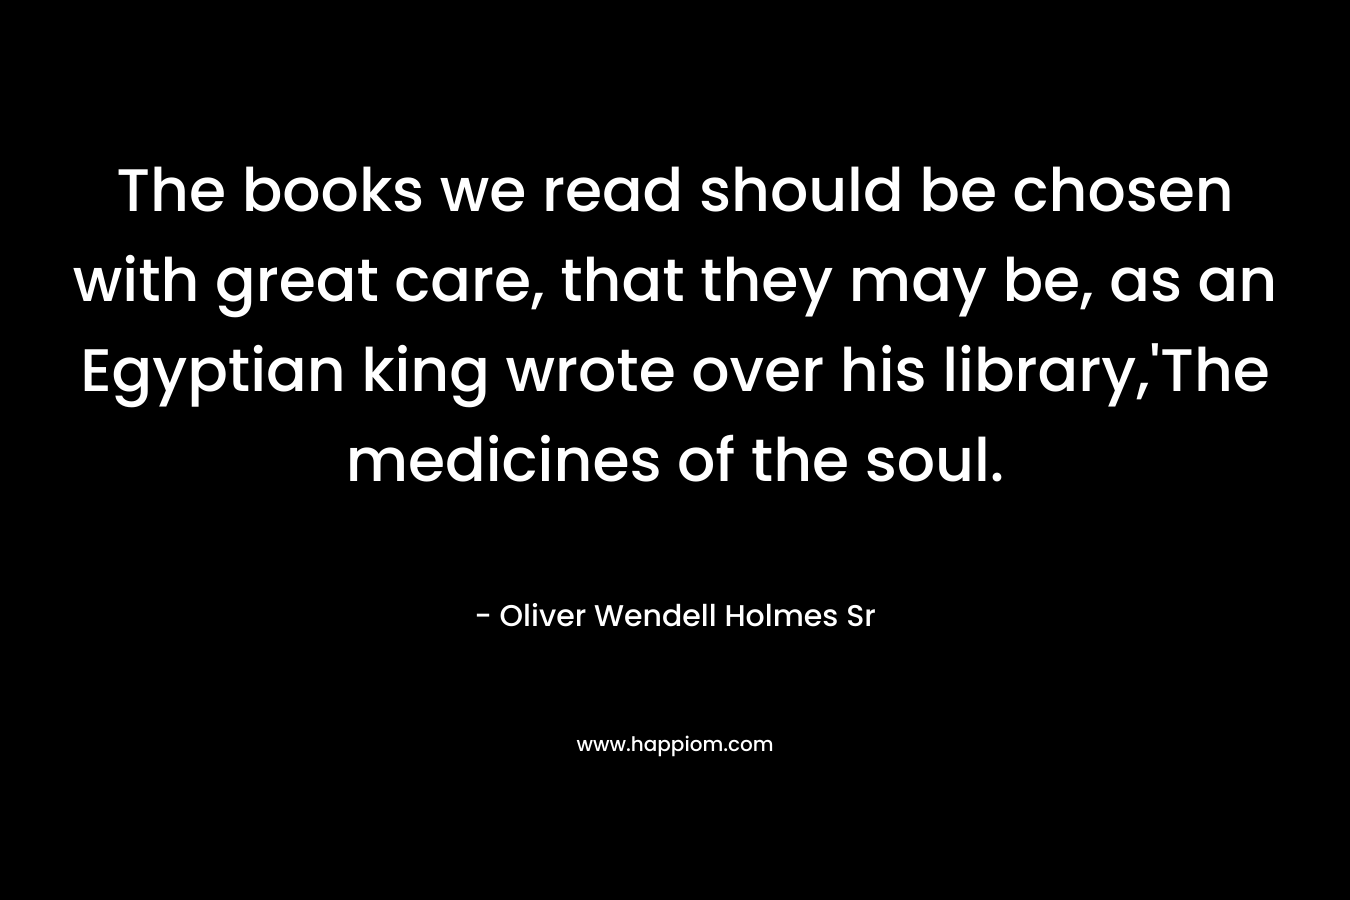 The books we read should be chosen with great care, that they may be, as an Egyptian king wrote over his library,’The medicines of the soul. – Oliver Wendell Holmes Sr